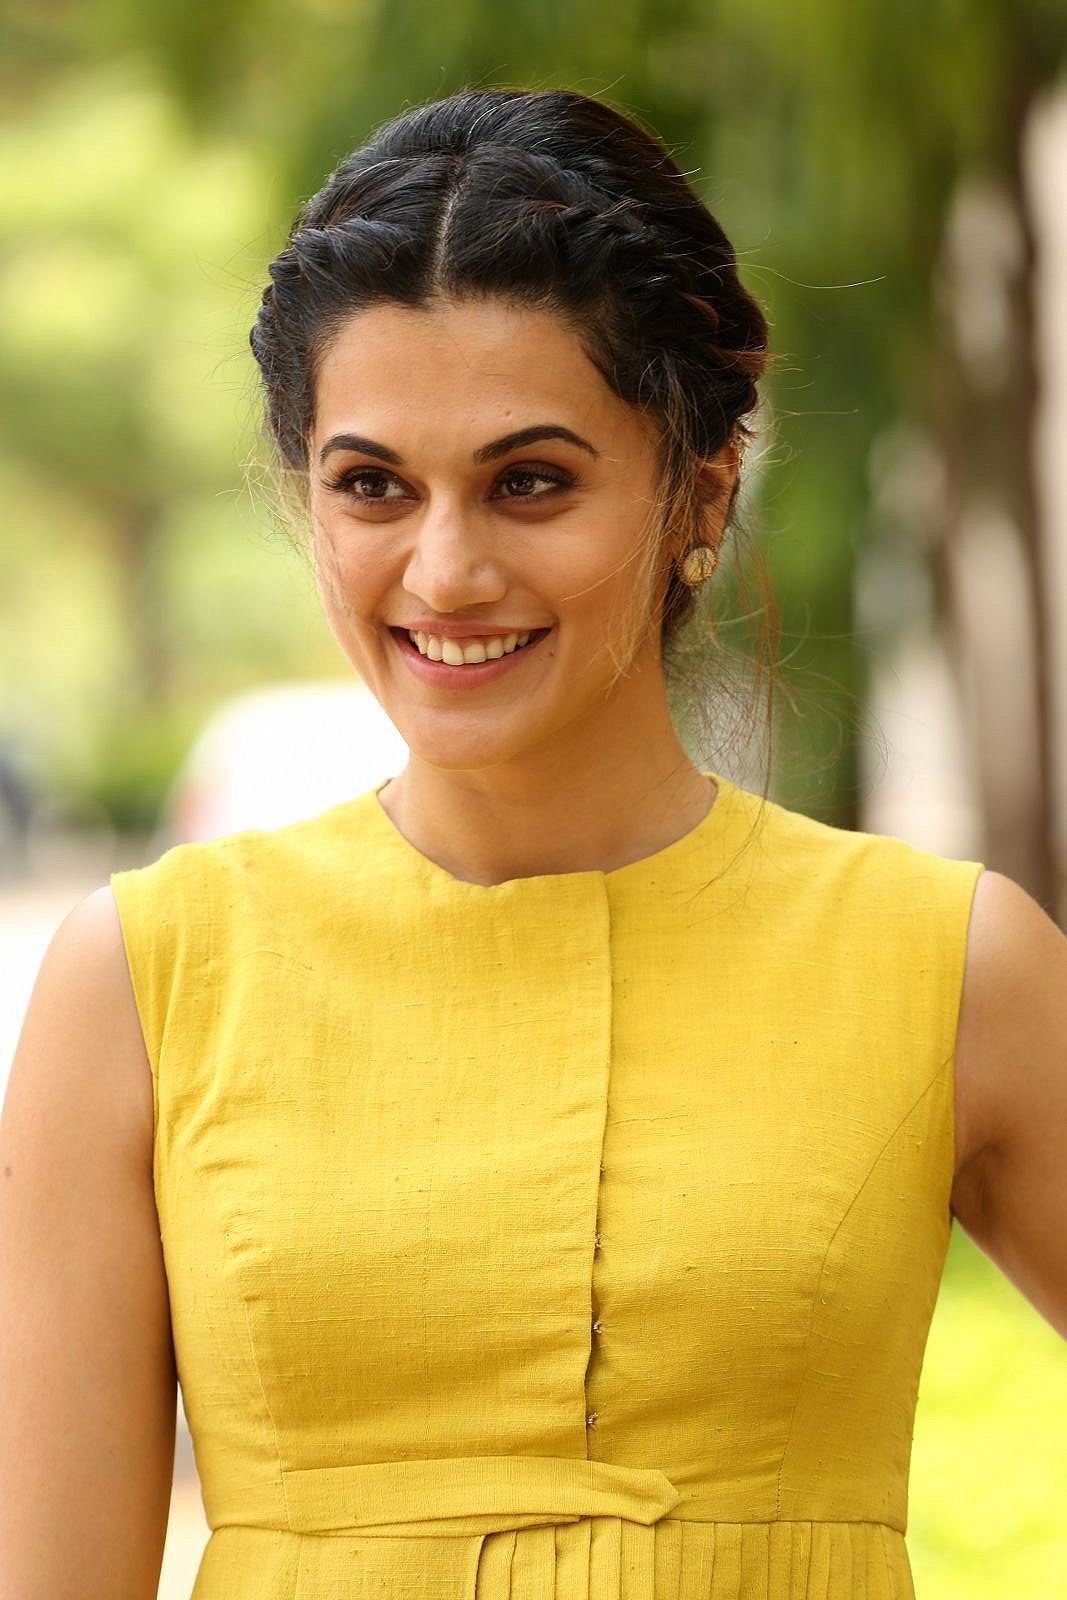 Taapsee Pannu at Anando Brahma Movie Motion Poster Launch Photos | Picture 1500639